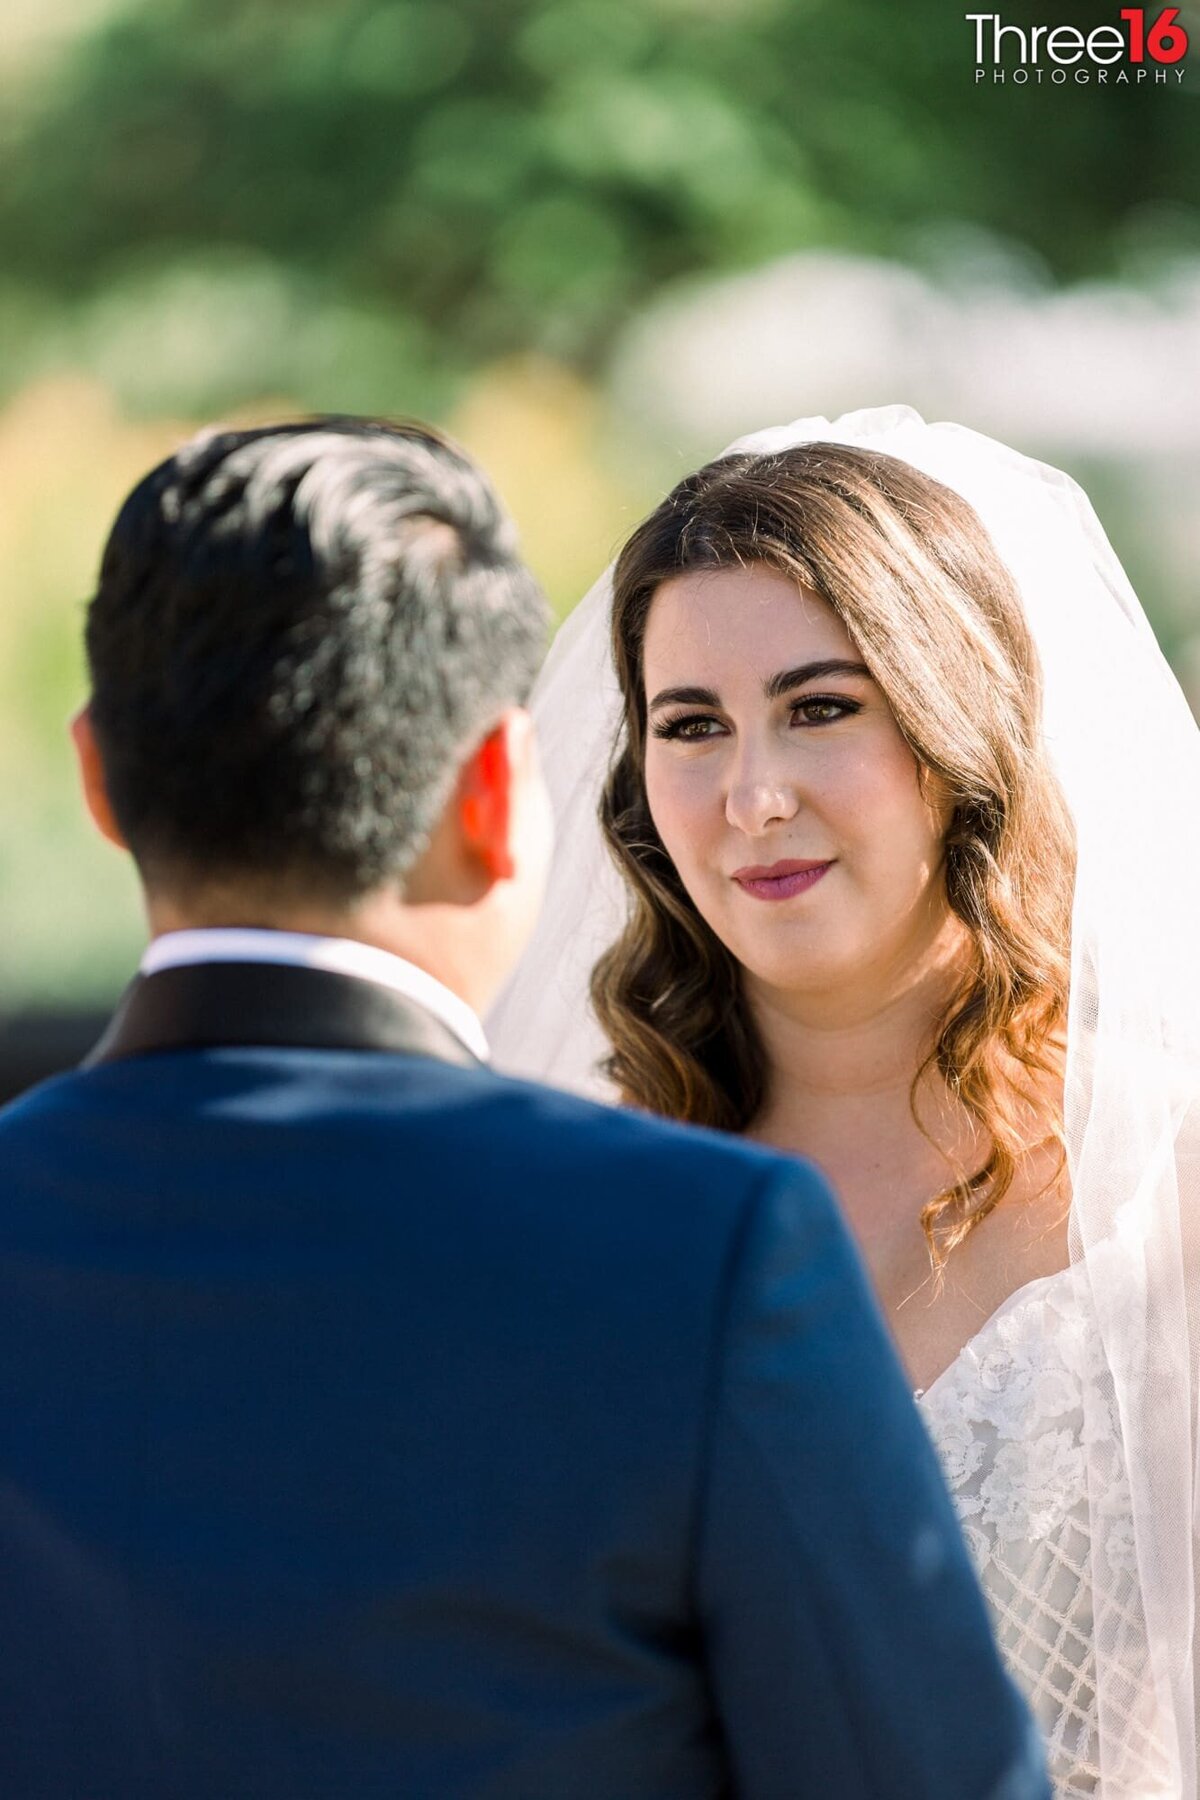 Bride lovingly gazes at her Groom during the wedding ceremony